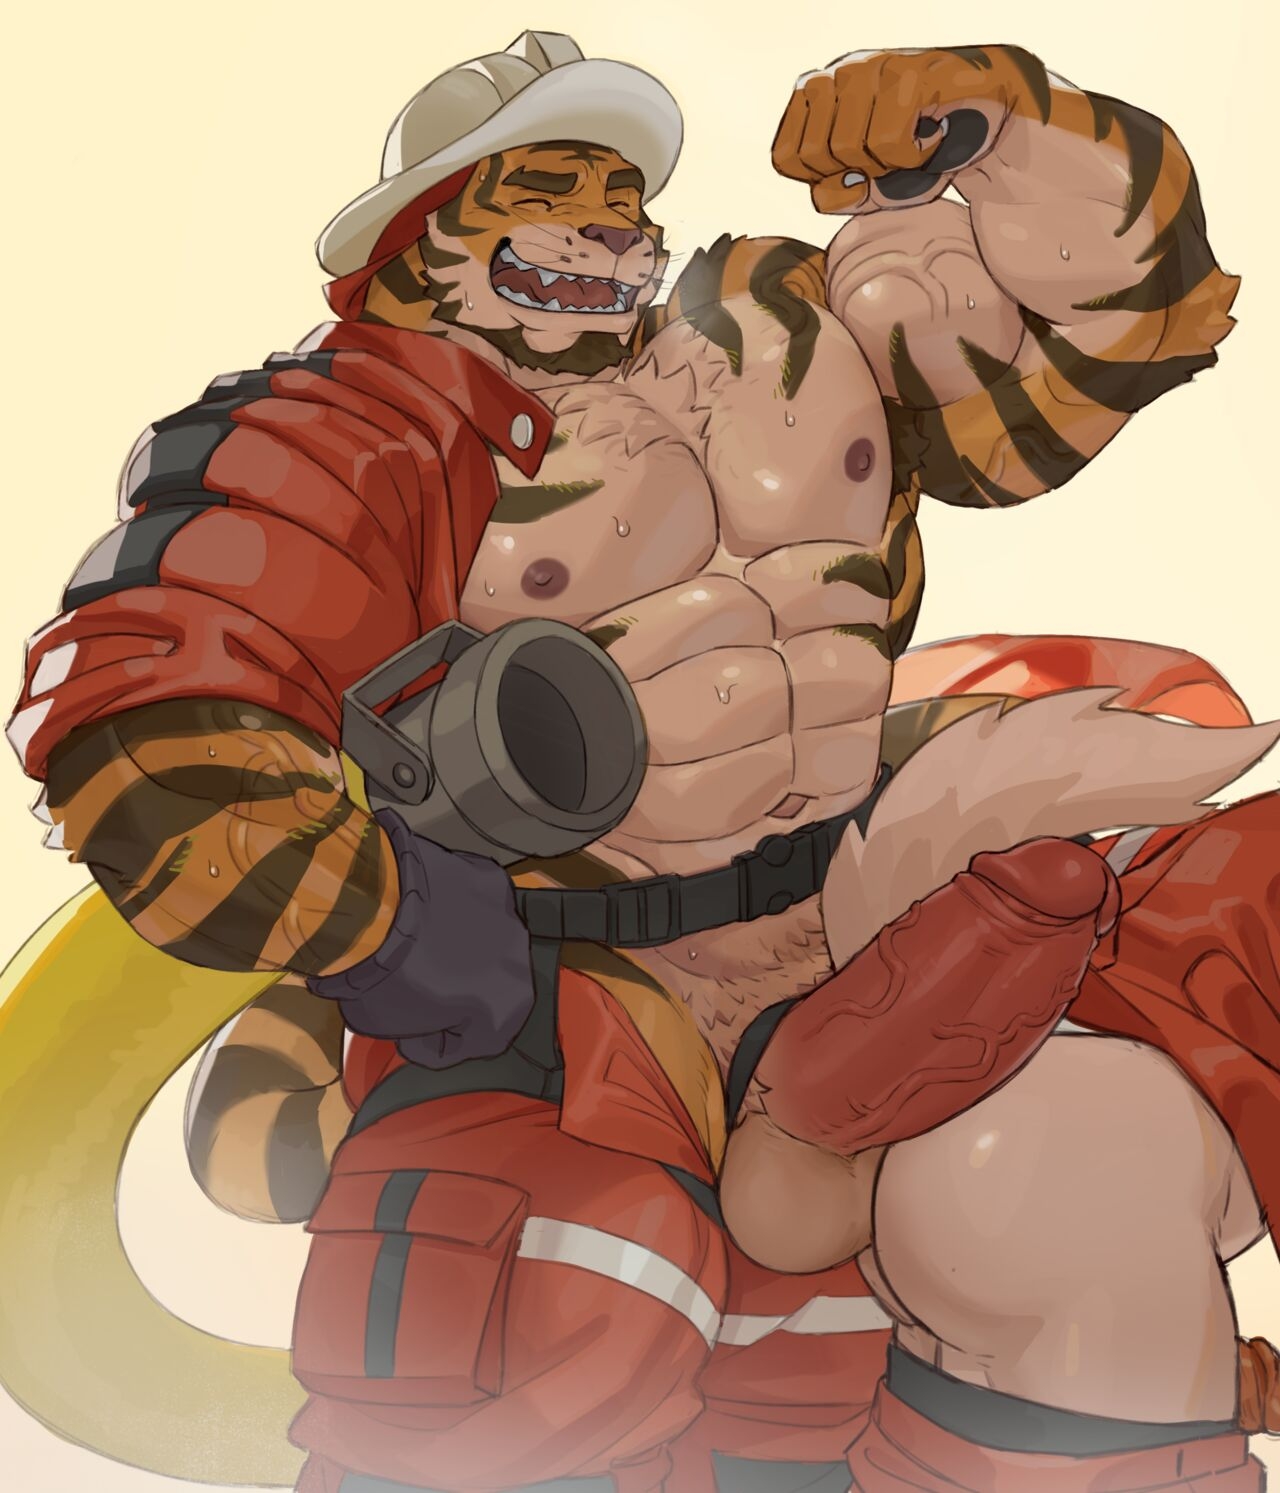 [Imatoart] Tiger Fire Chief's Training Session | 老虎消防队长的训练时间! [Chinese][Translated by Chrome Heart Tags] 39